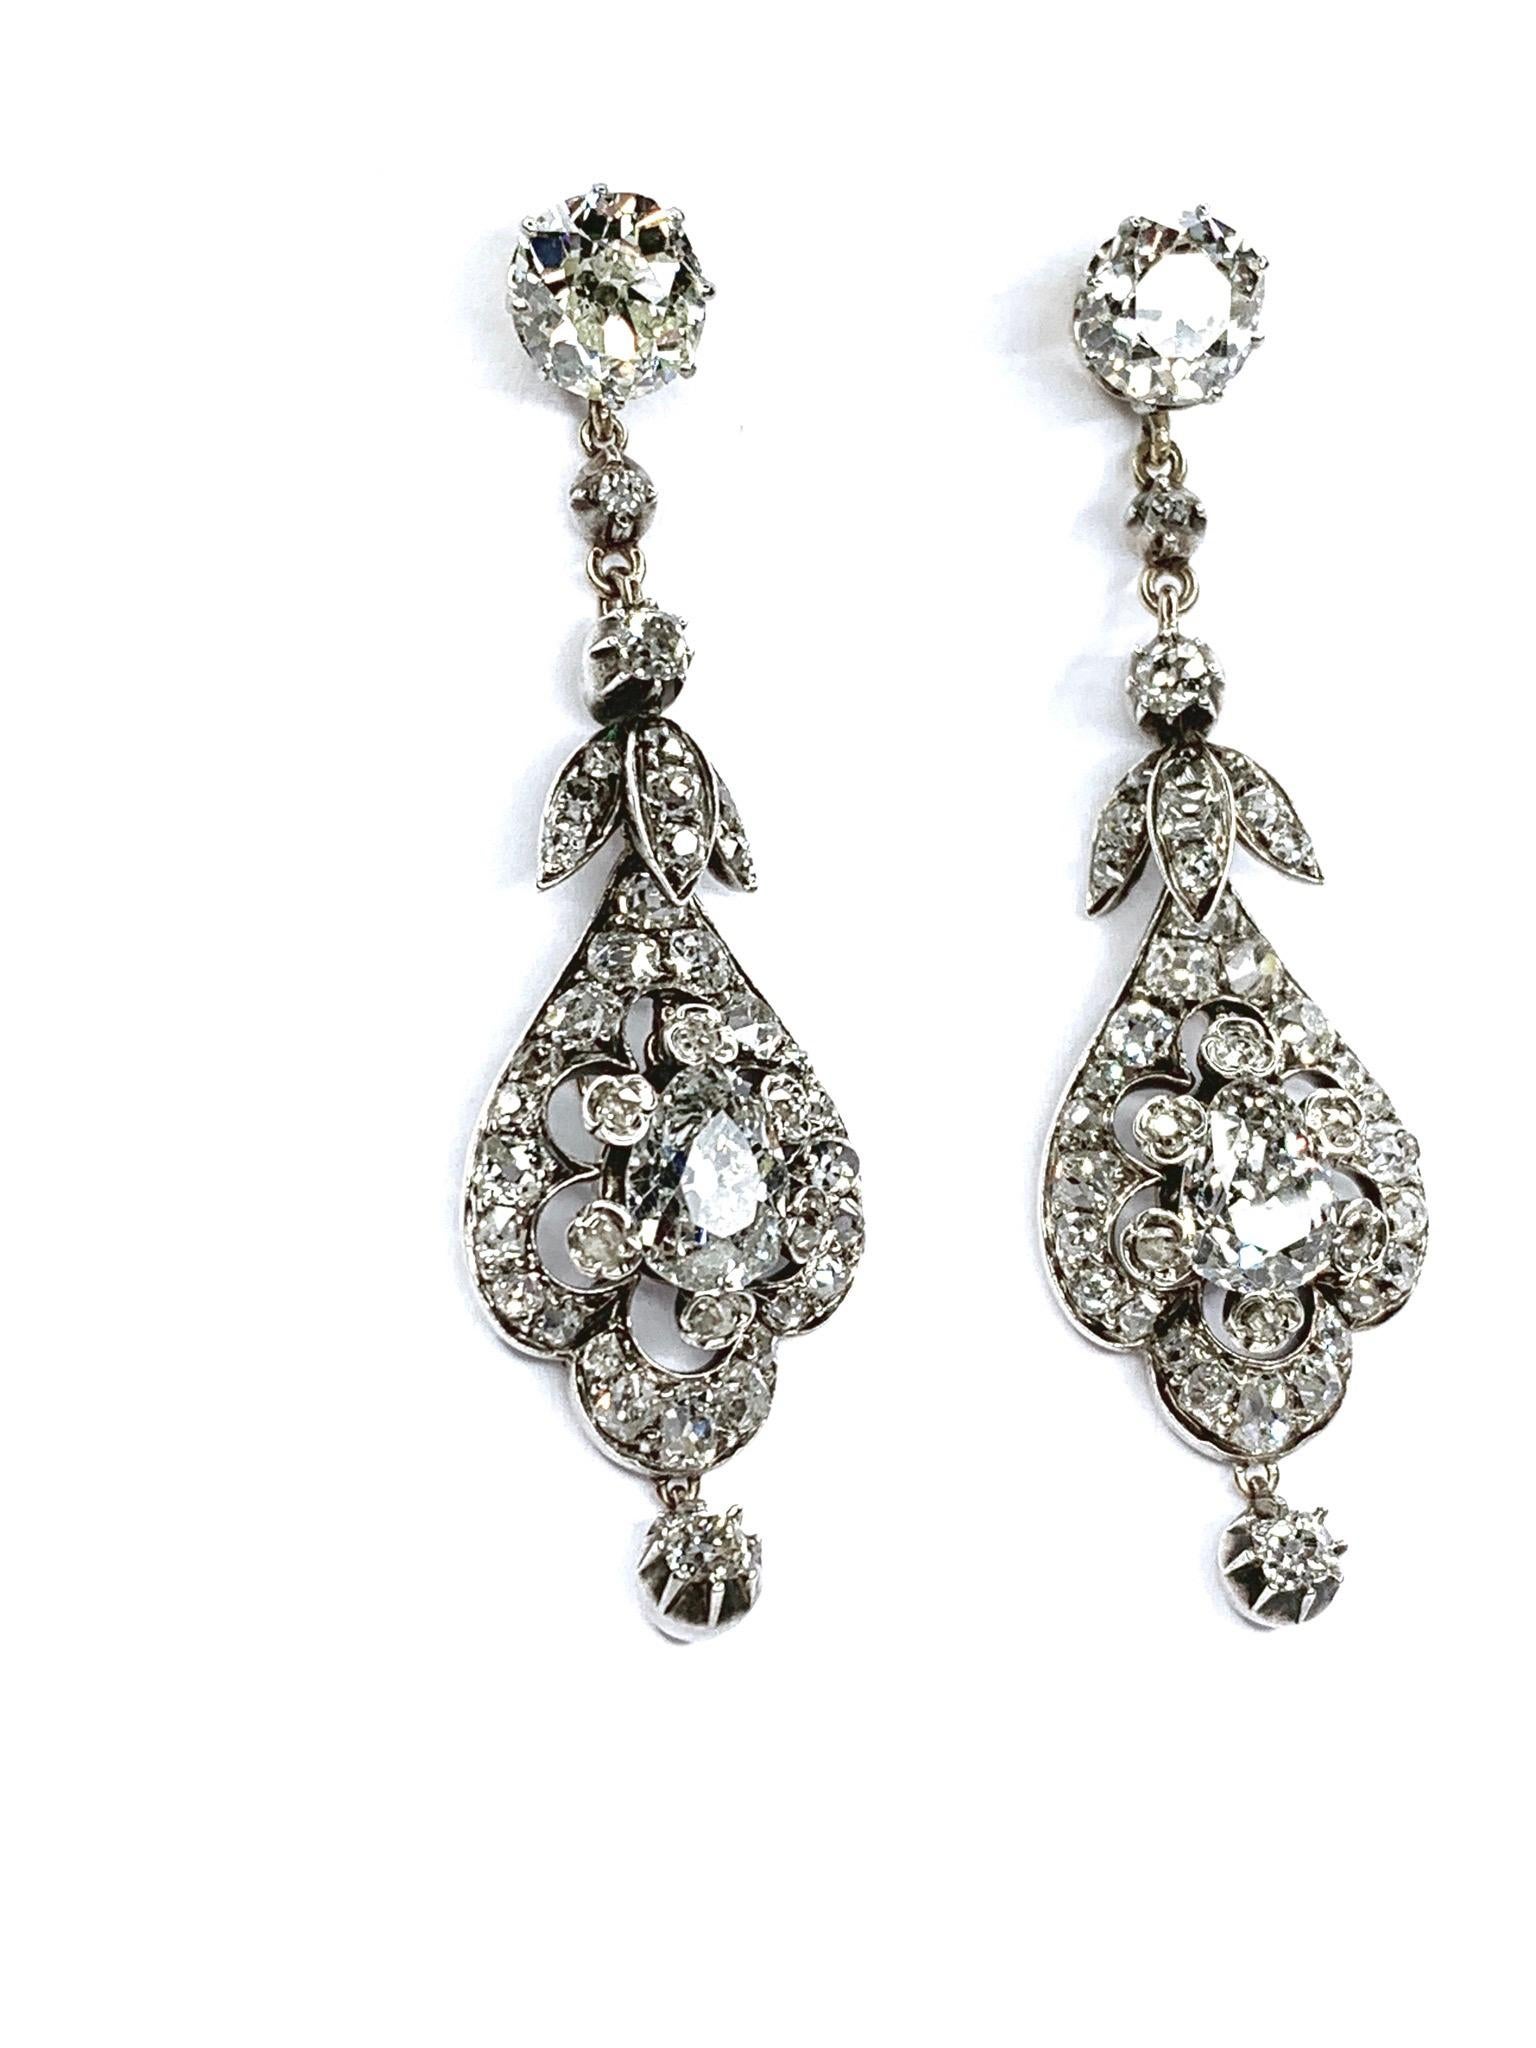 Antique Pair of Diamond Earrings, Cushion Shaped Diamonds estimated weight 1.70 & 1.80 carats, estimated color I-J & clarity VS2. Pear shaped diamonds estimated weight 1.25 & 1.38 carats, estimated color I-J & clarity I. in silver and 18K gold.